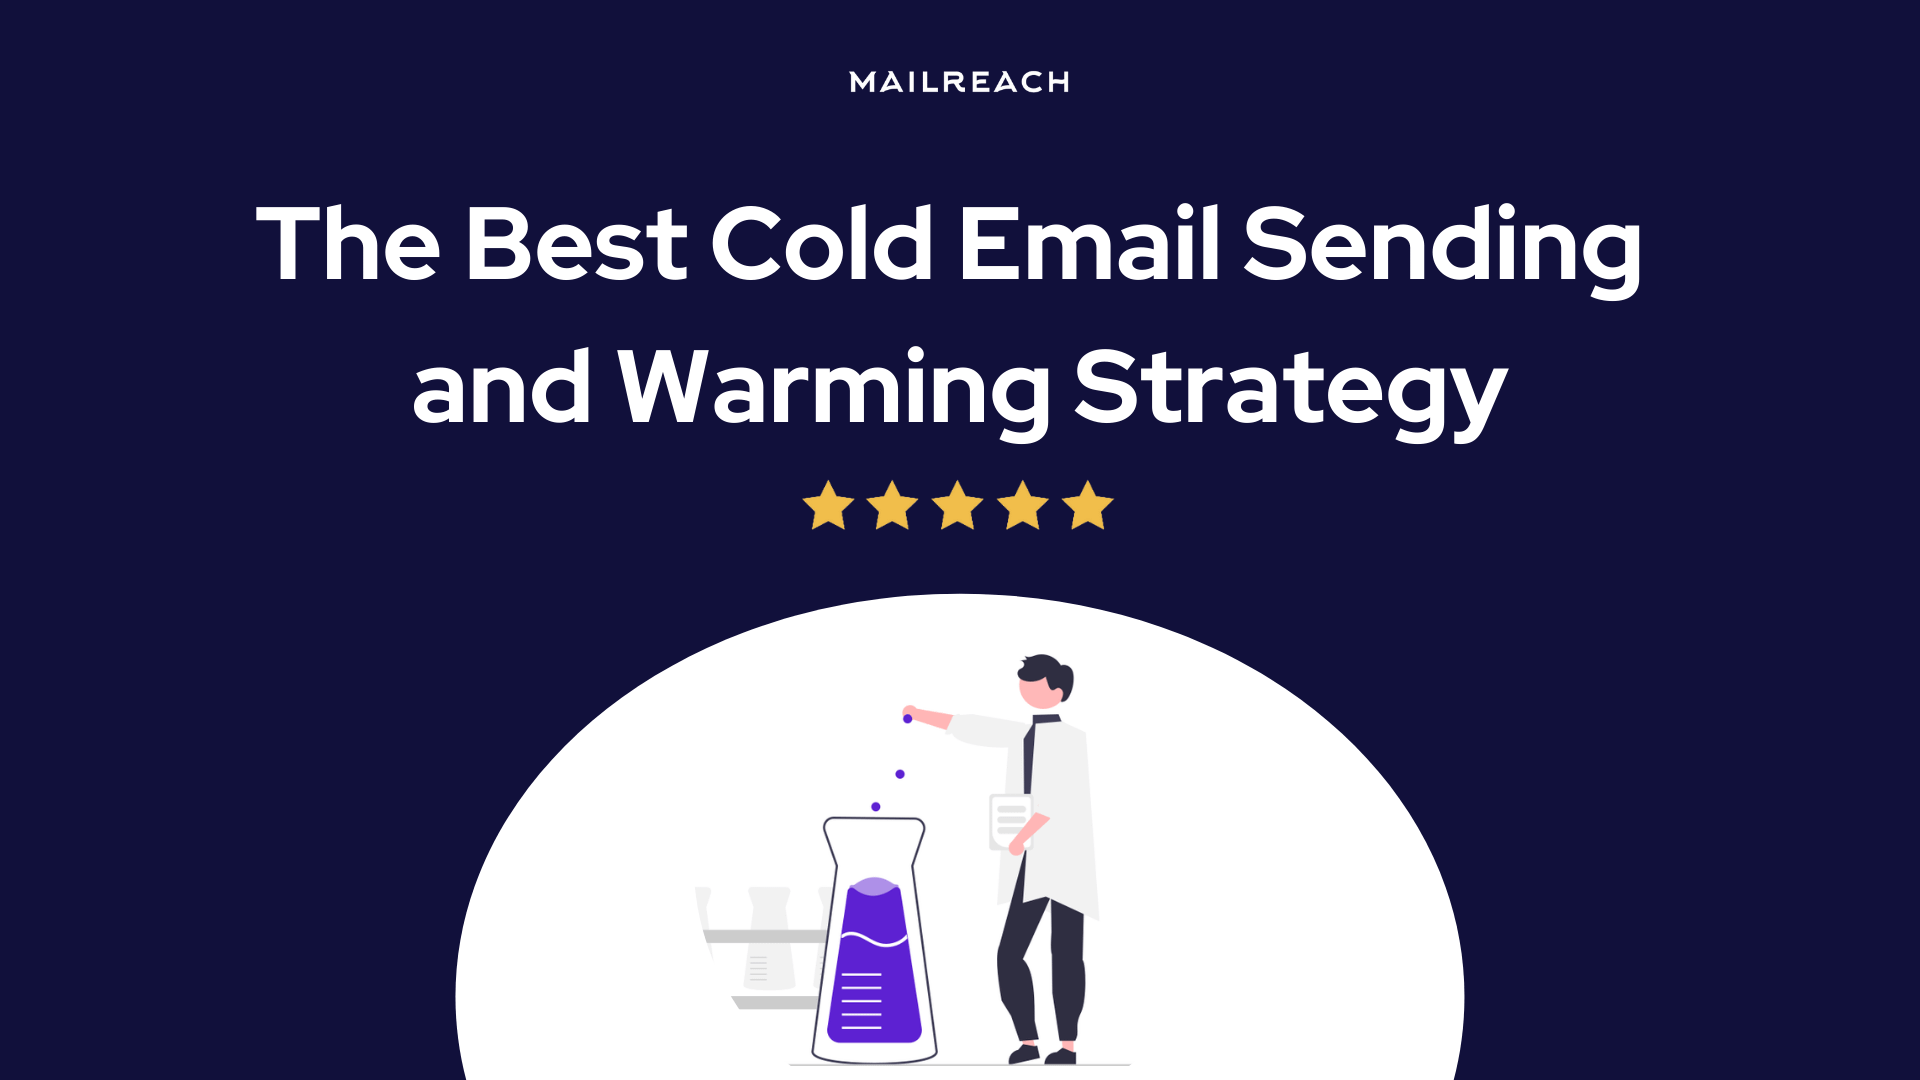 A man cooking the best cold email sending and warming strategy to avoid landing in spam